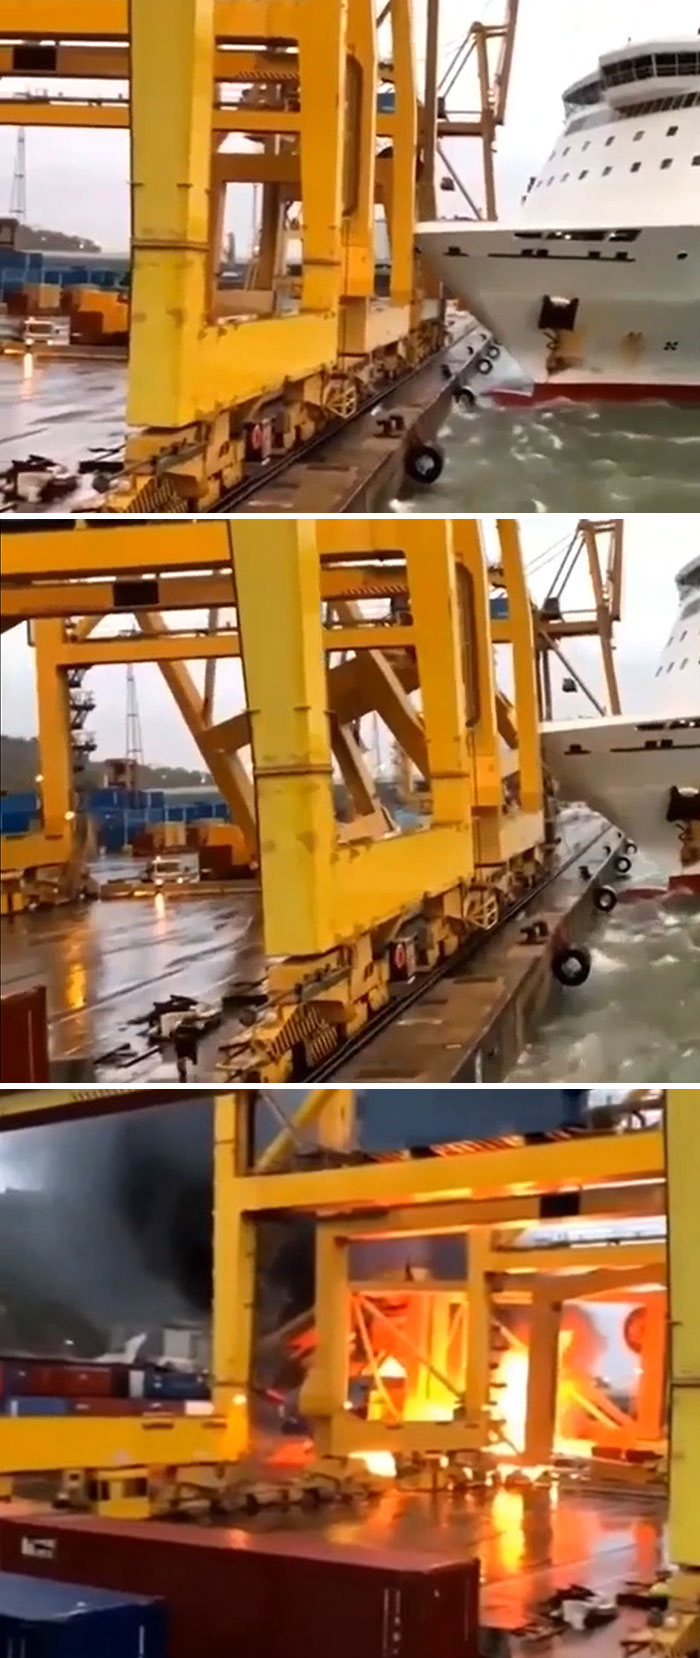 Ferry Crashes Into A Loading Dock In Barcelona Causing A Fire